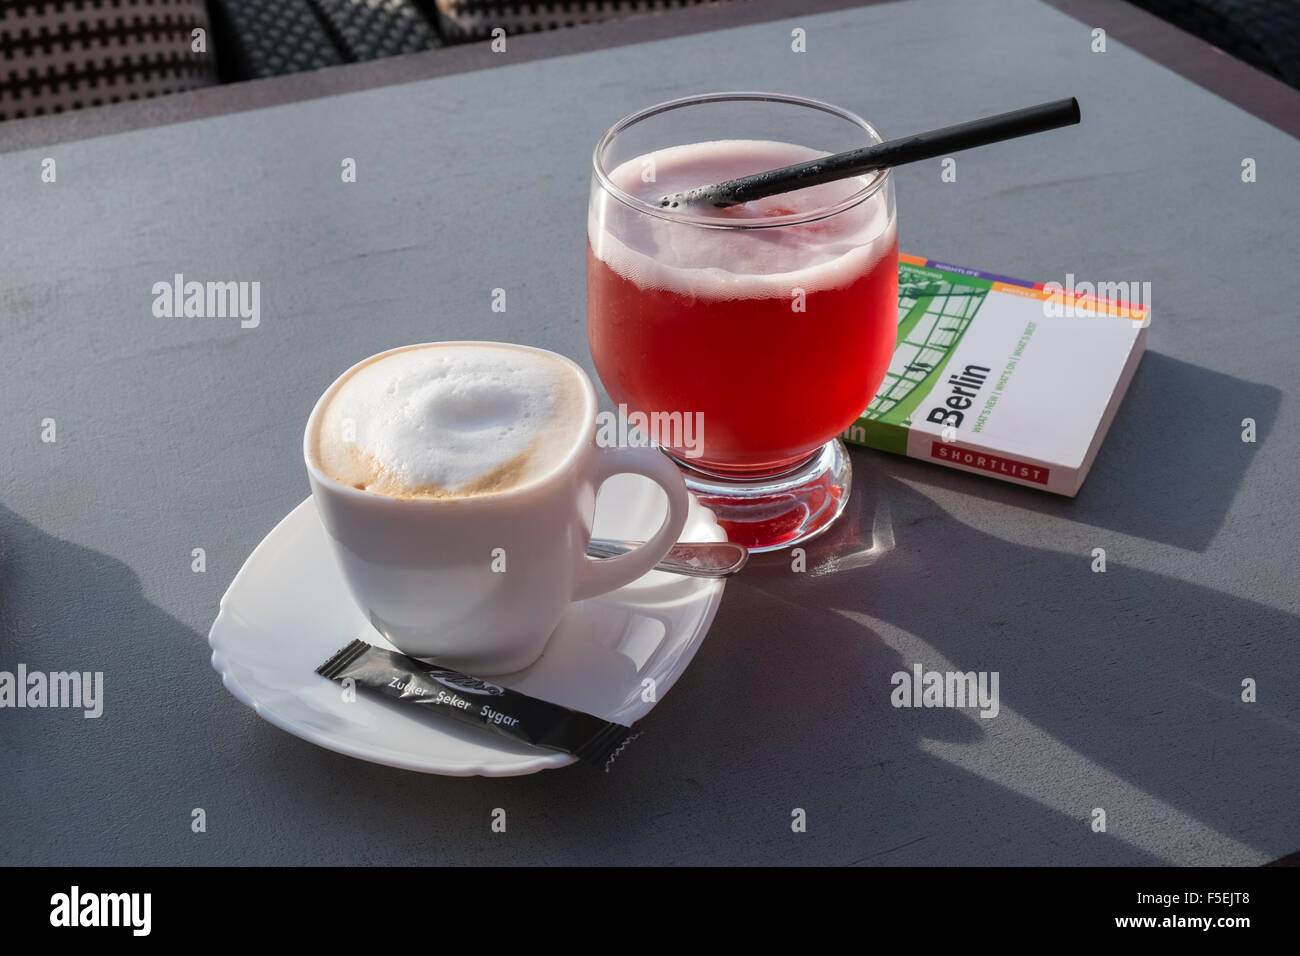 Cappuccino and red beer drinks, served in Berlin, Germany Stock Photo